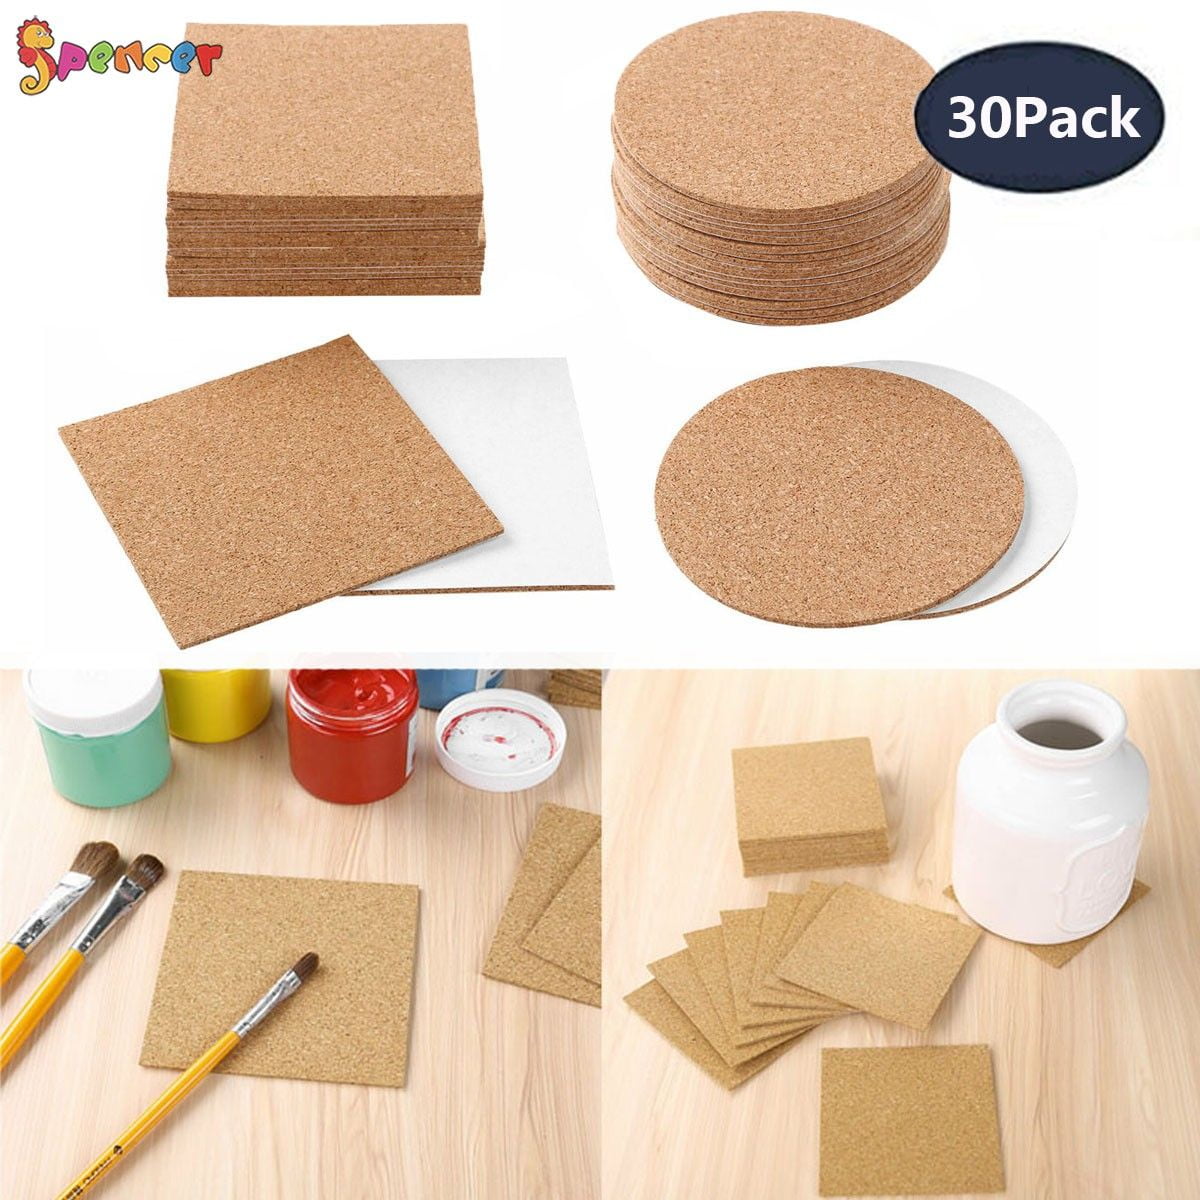 Details about   10-80Pcs 4x4inch Self-Adhesive Cork Squares Round Backing Sheets Tiles Coasters 